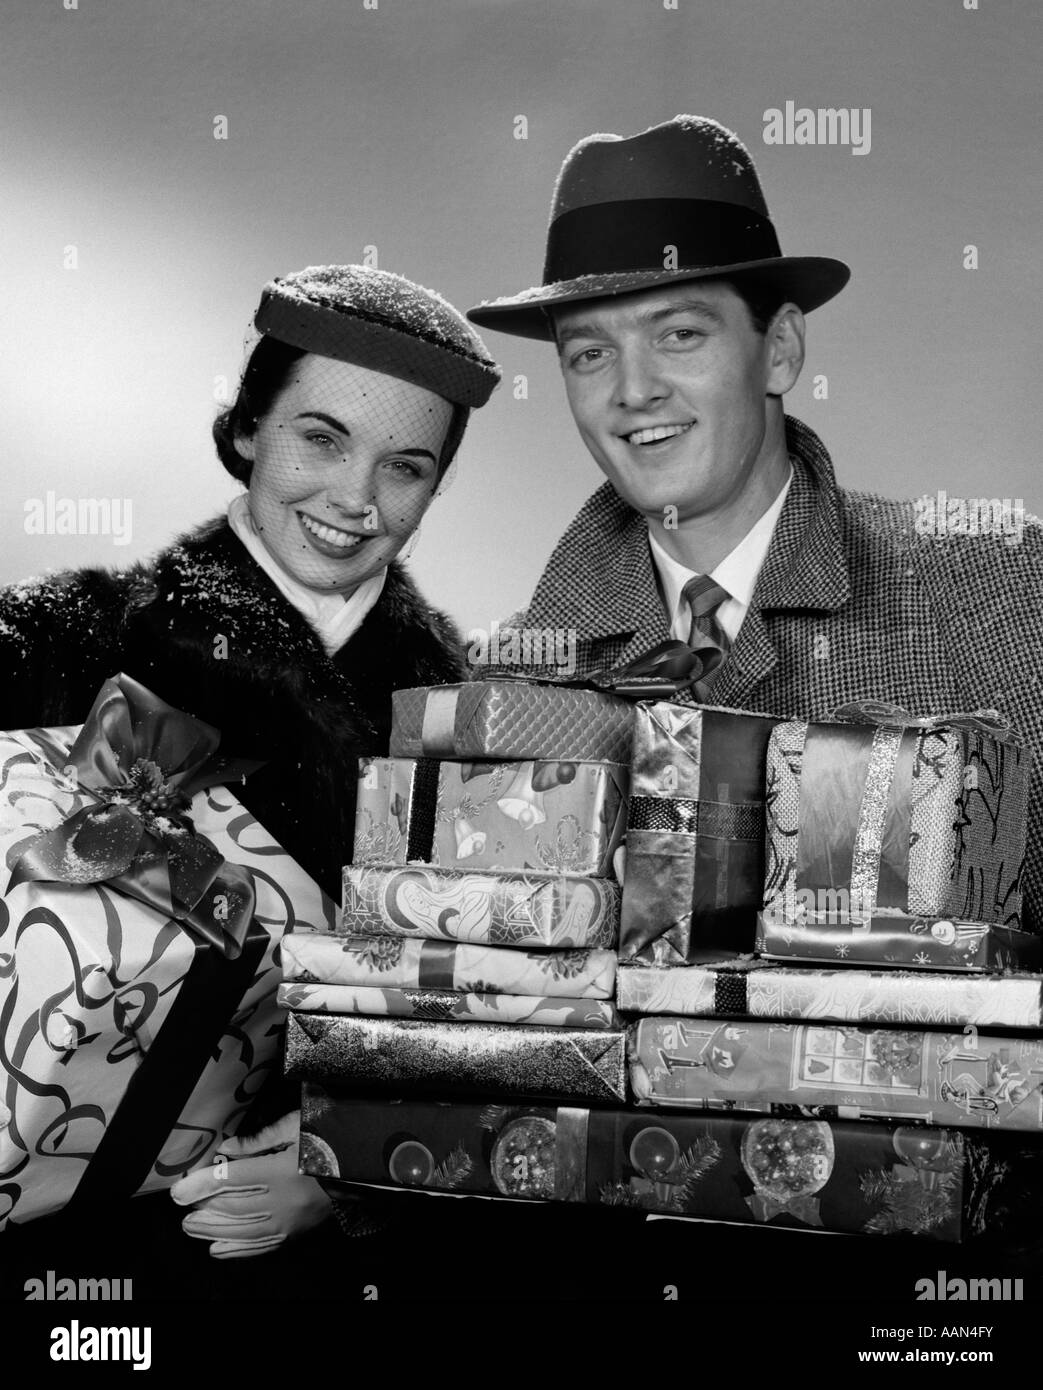 Années 1950 Années 1960 SMILING PORTRAIT COUPLE in winter coats & HATS HOLDING WRAPPED CHRISTMAS GIFTS LOOKING AT CAMERA Banque D'Images